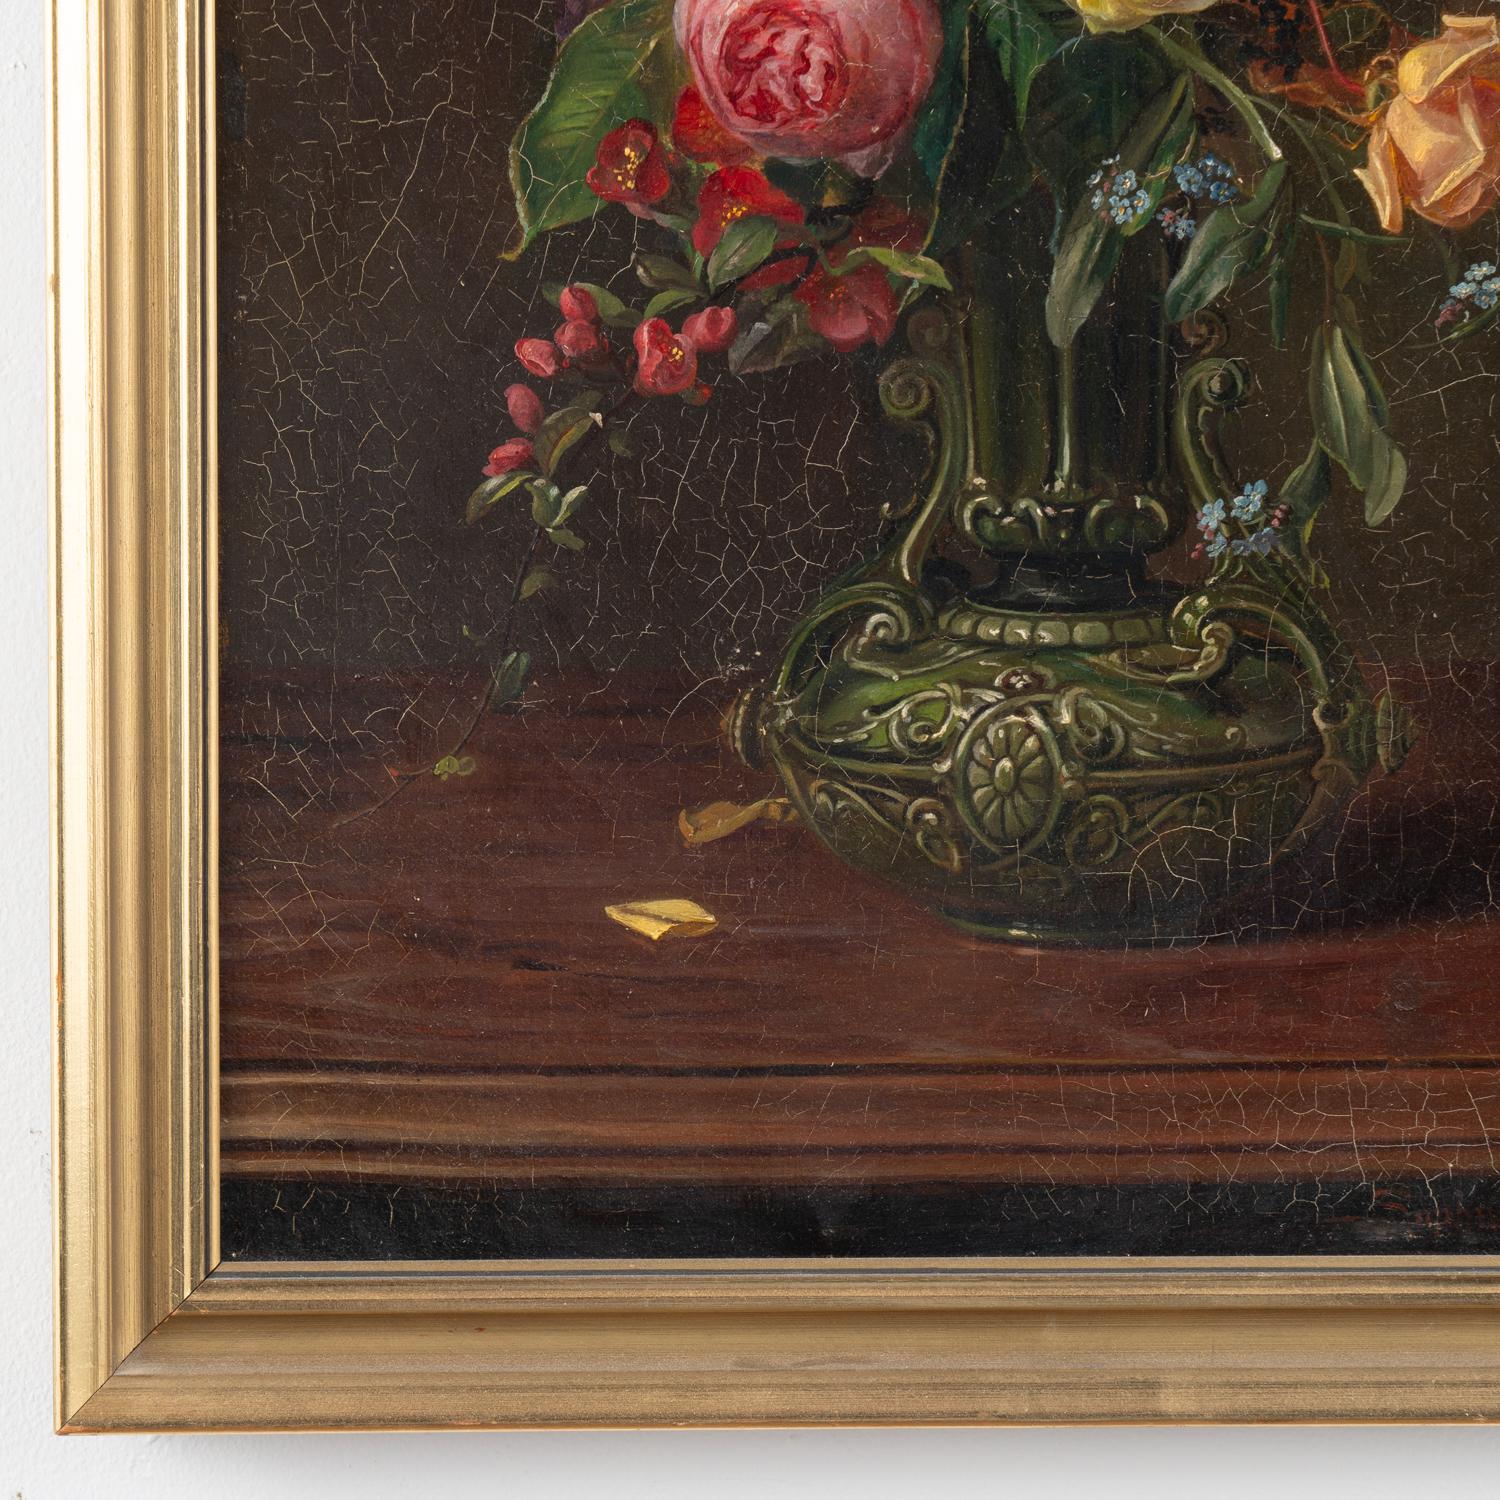 Original Oil on Canvas Still Life Painting of Flowers by Sophus Petersen, 1885 For Sale 4